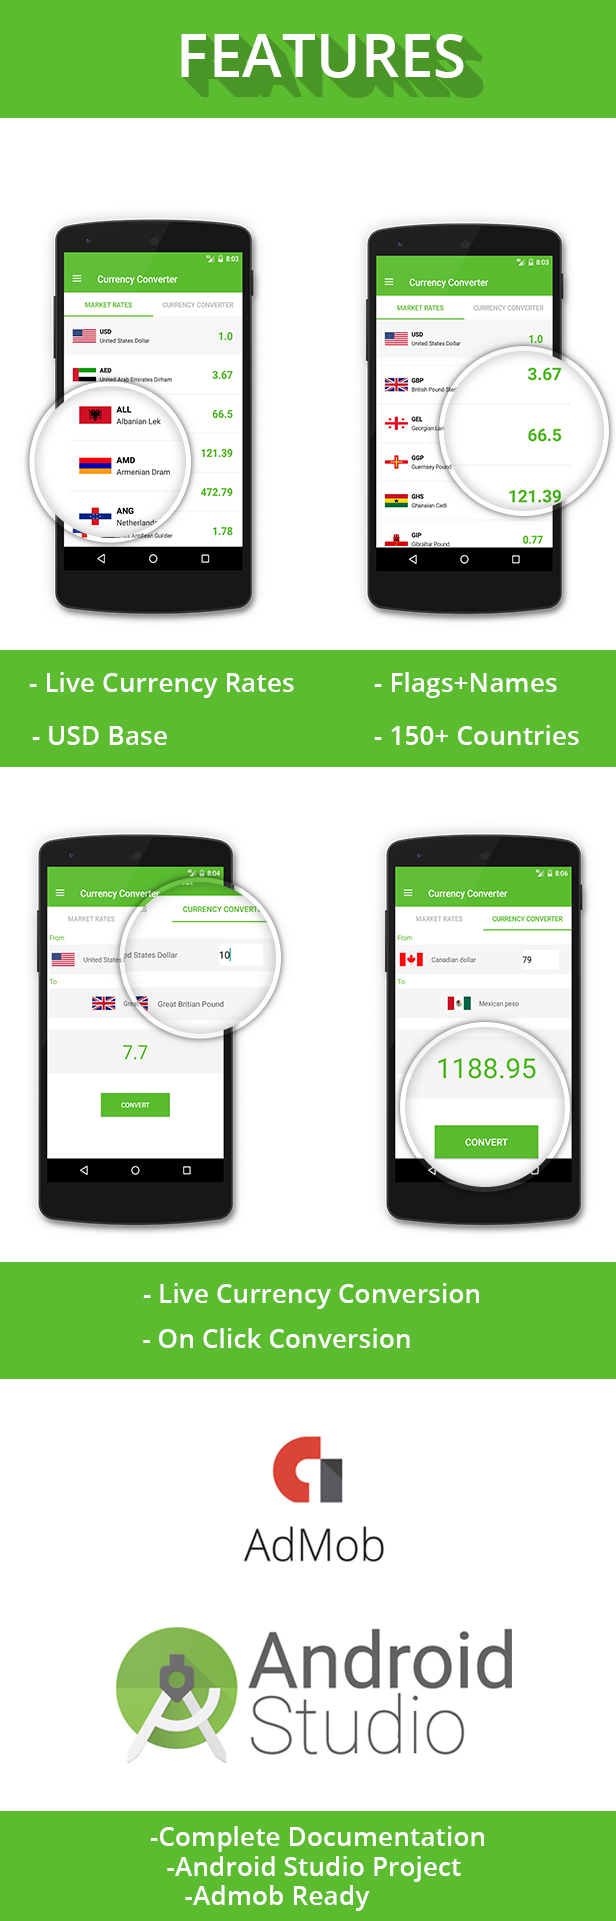 Currency Converter + Admob Ready - 1